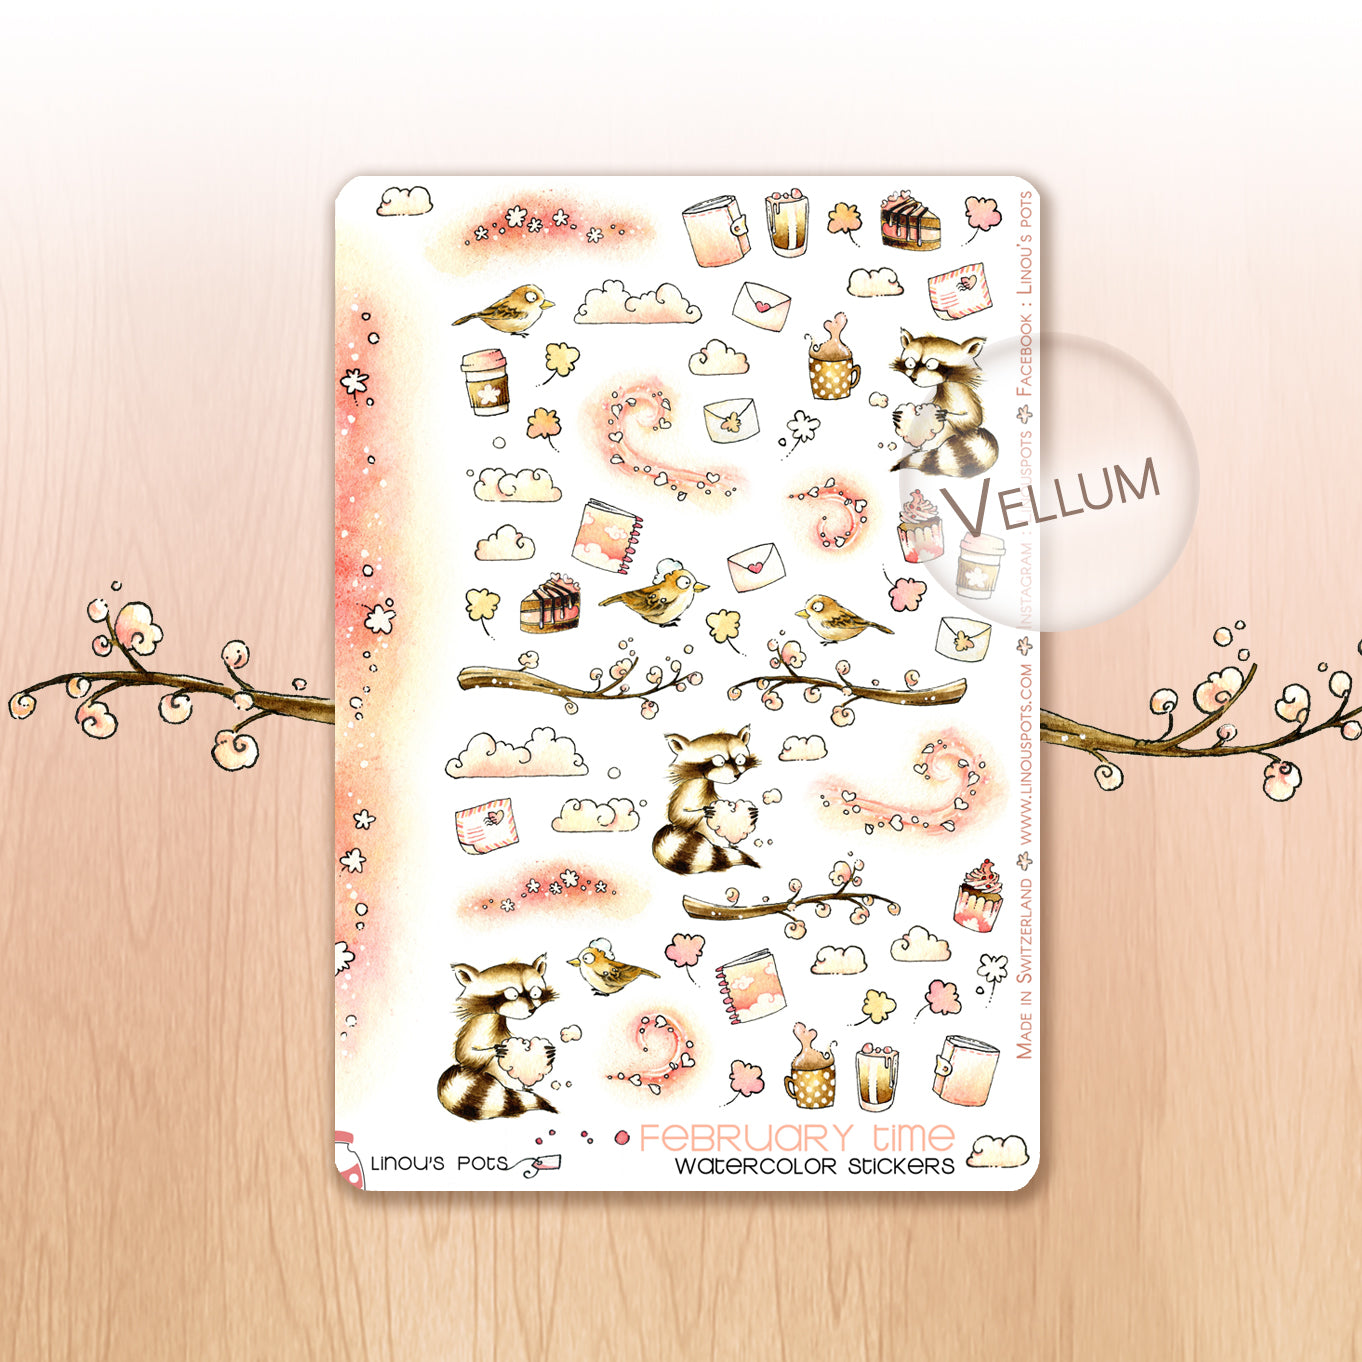 Watercolored love filled stickers with raccoons - vellum finition